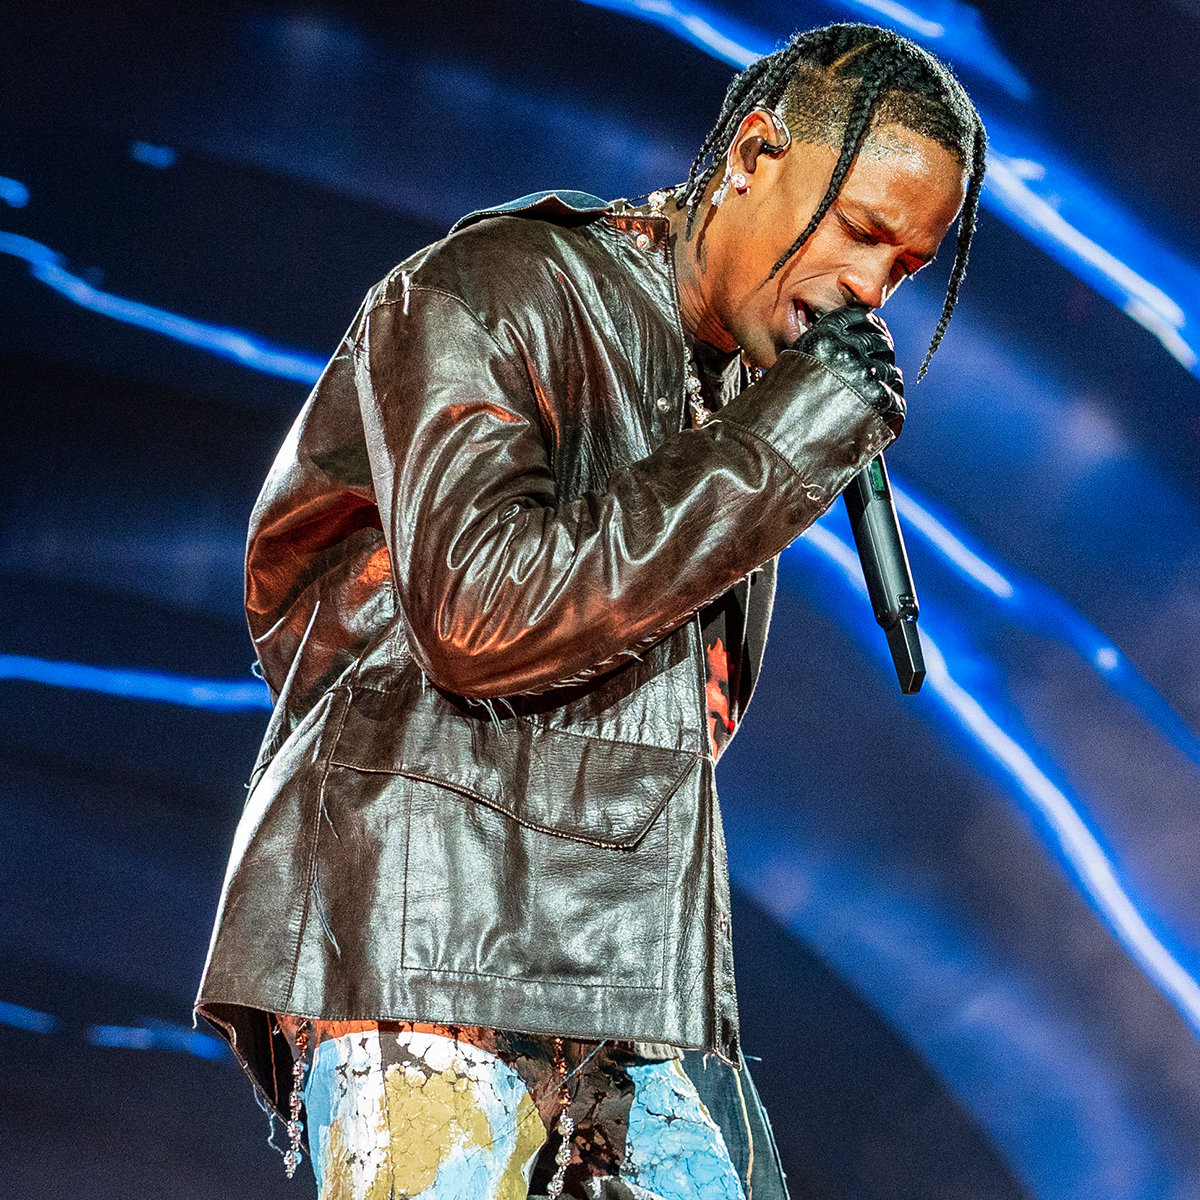 A year after Astroworld Festival deaths, no clear answers on